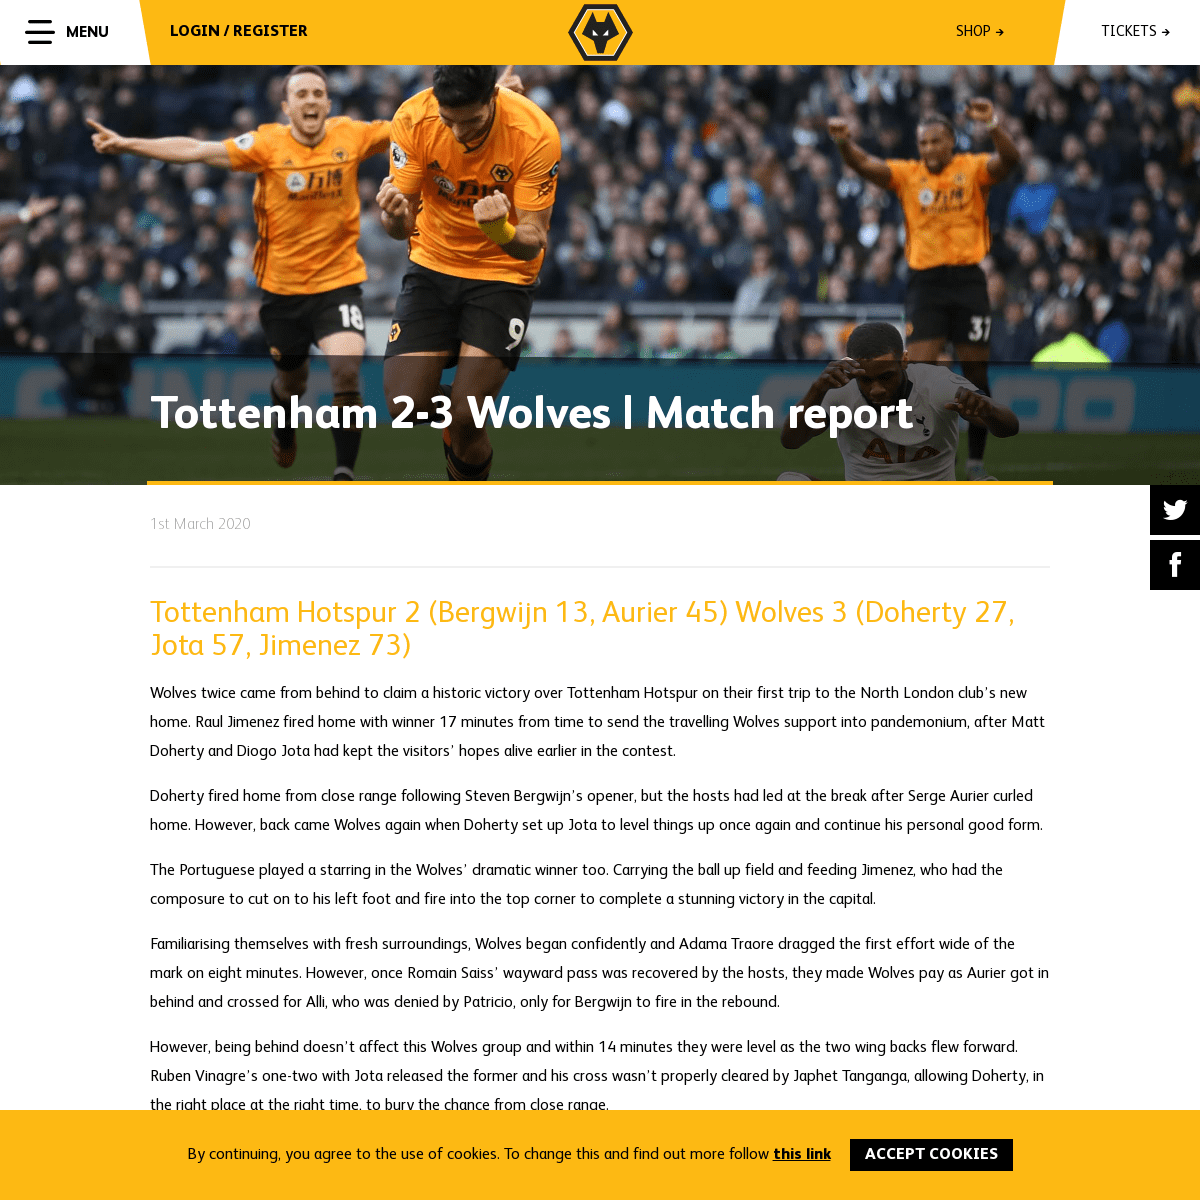 A complete backup of www.wolves.co.uk/news/first-team/20200301-tottenham-2-3-wolves-match-report/